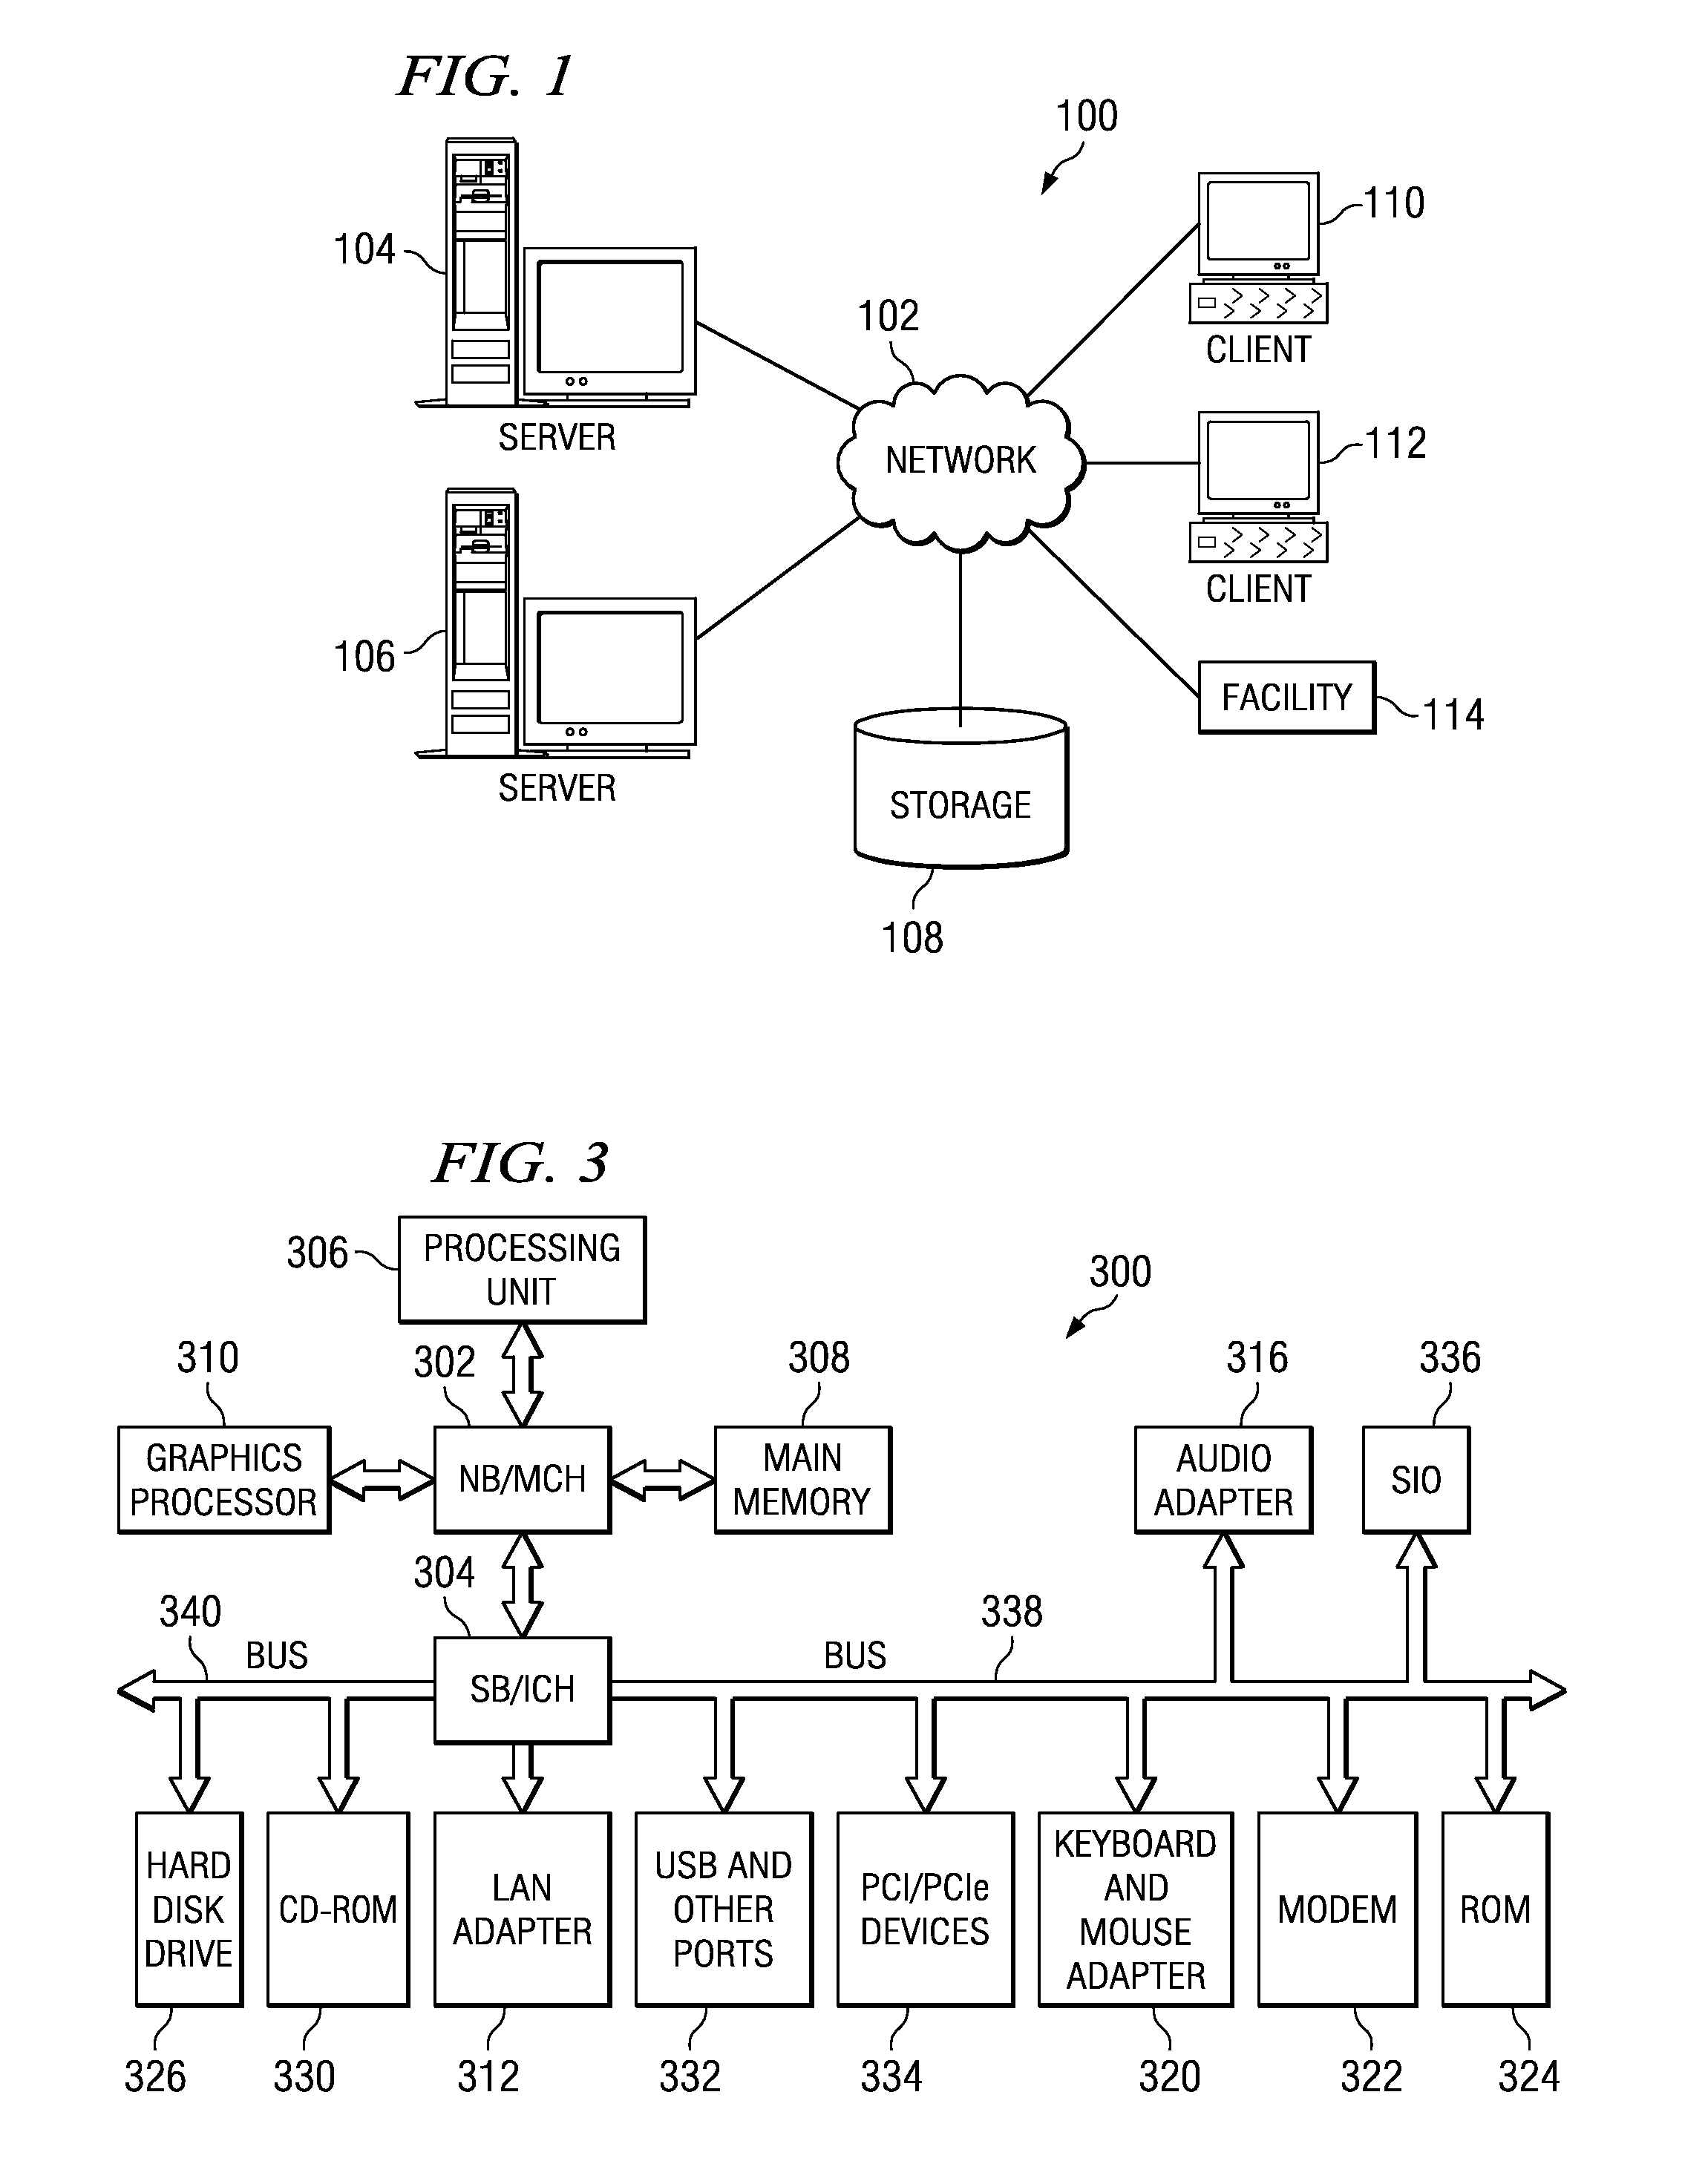 Method and apparatus for automatically generating labor standards from video data